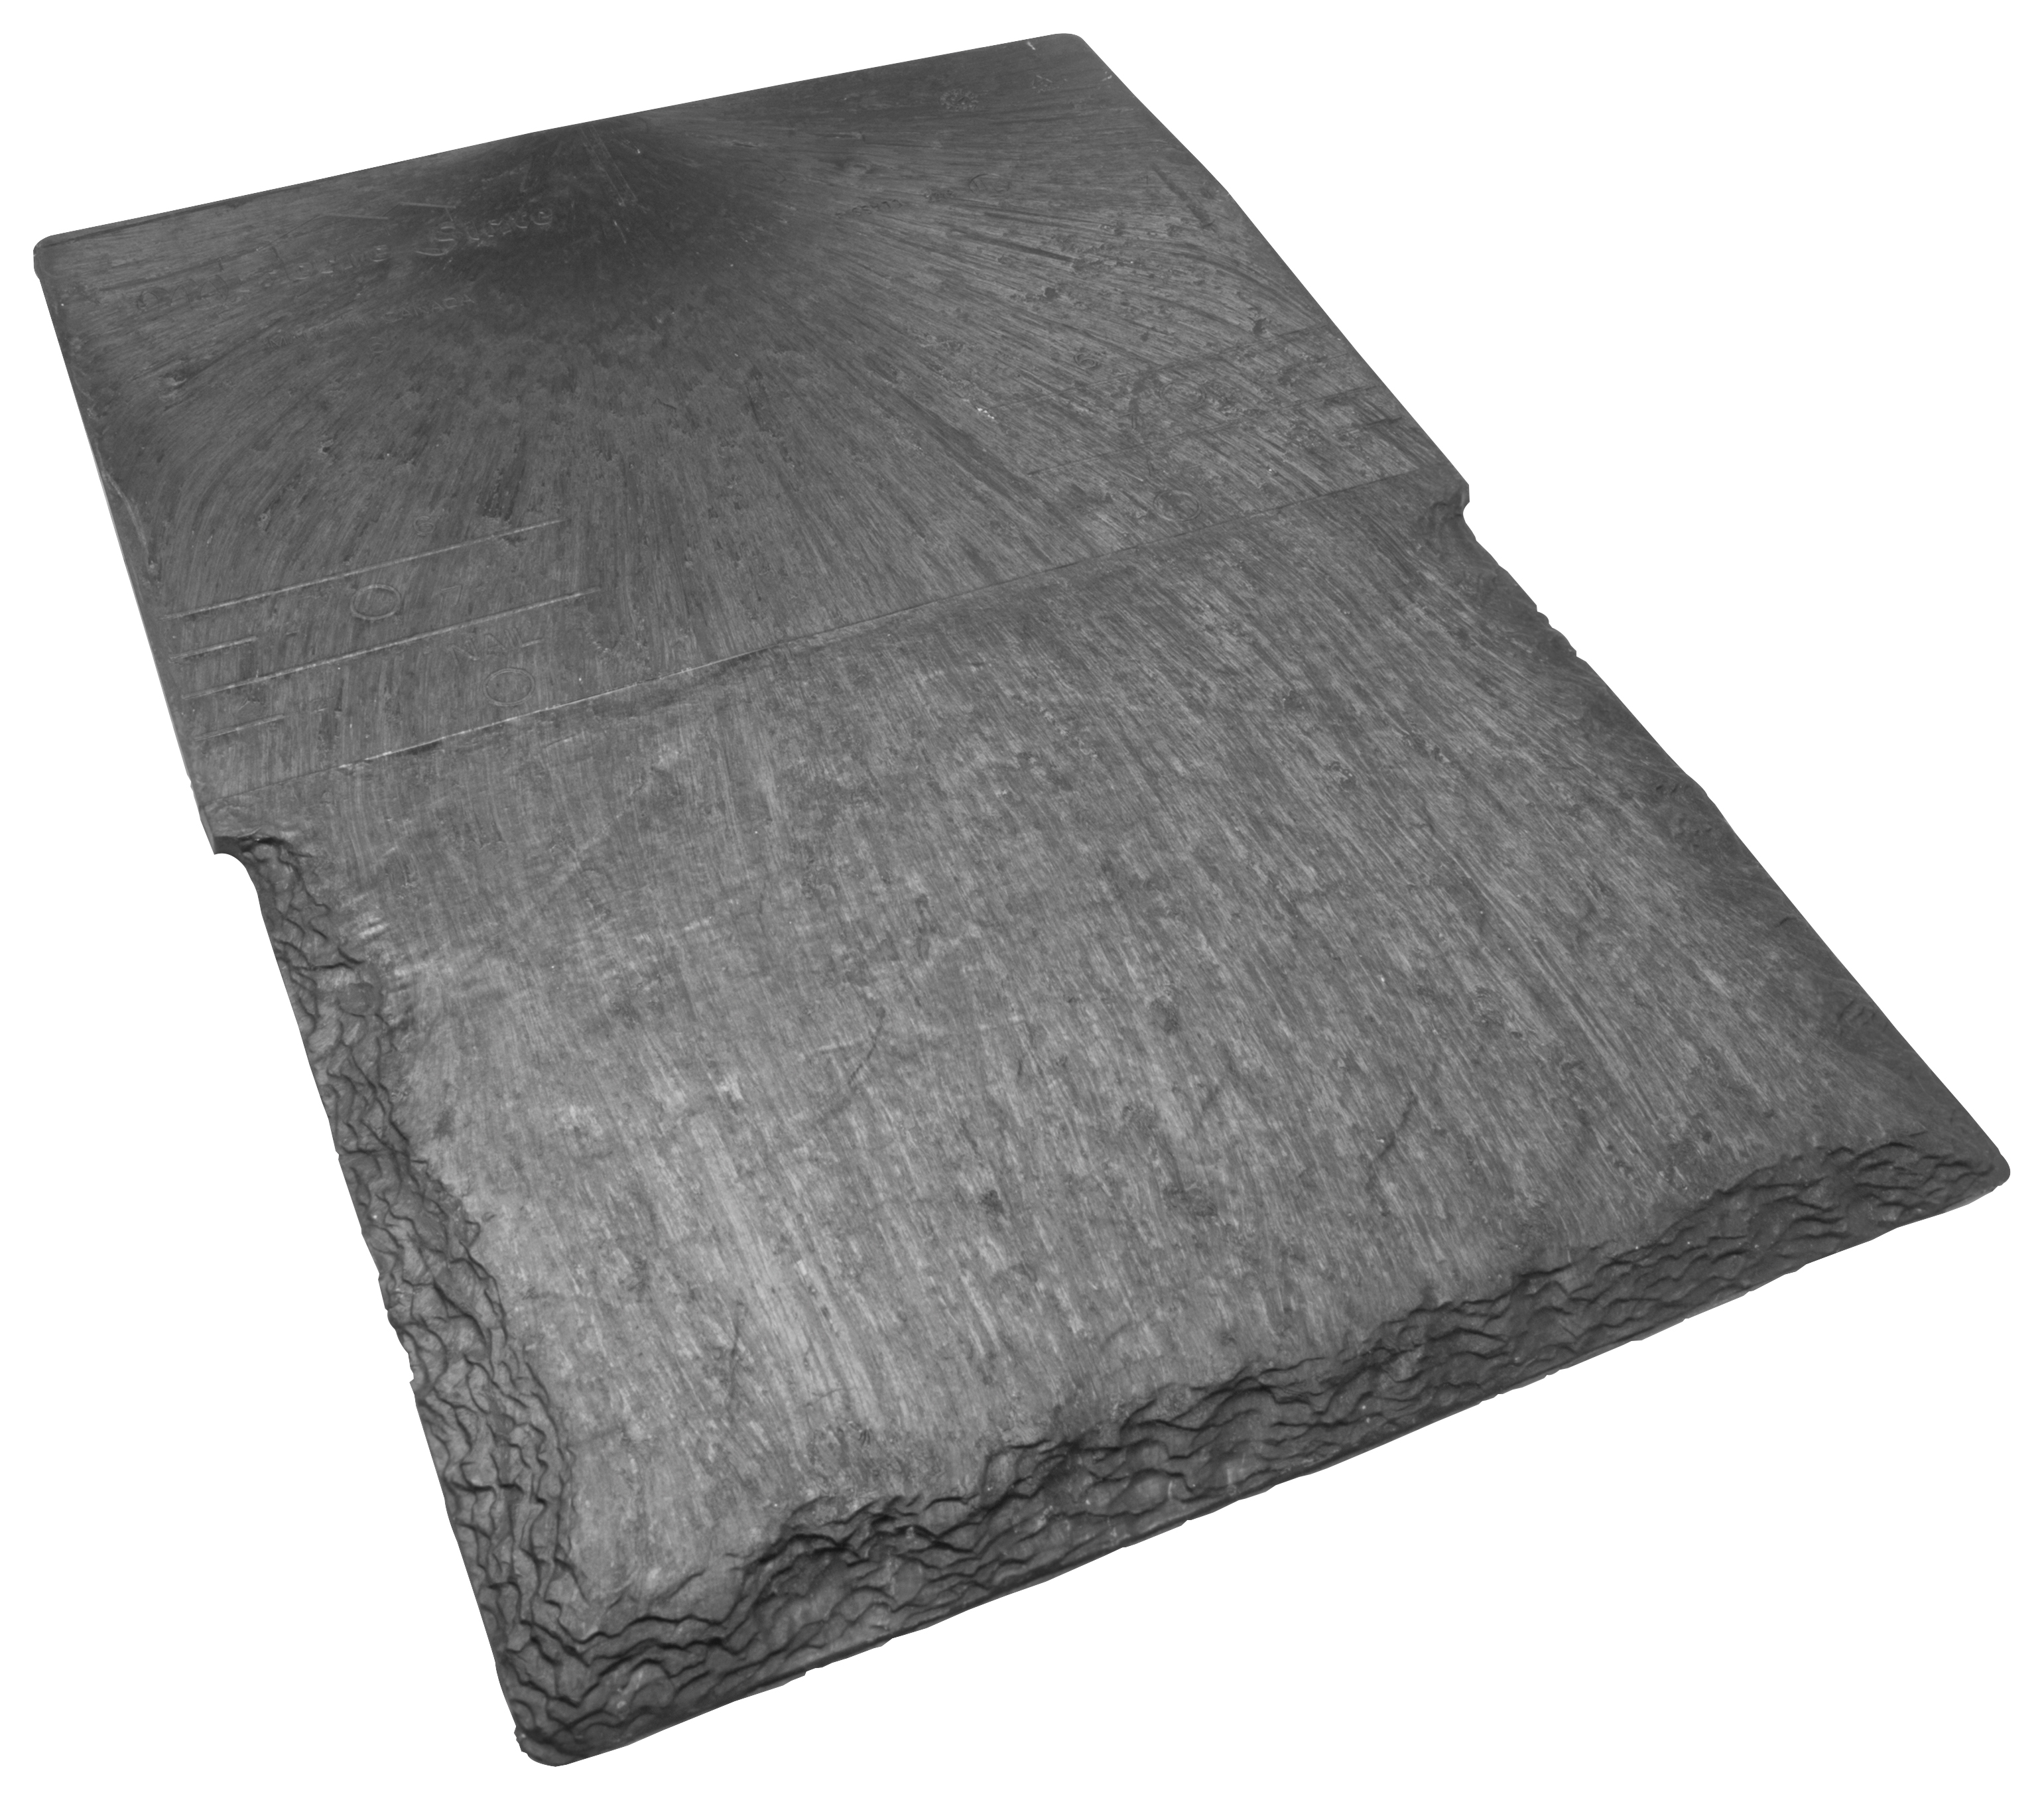 Image of IKO Slate Recycled Synthetic Slate Roof Tile Grey - Pack of 27